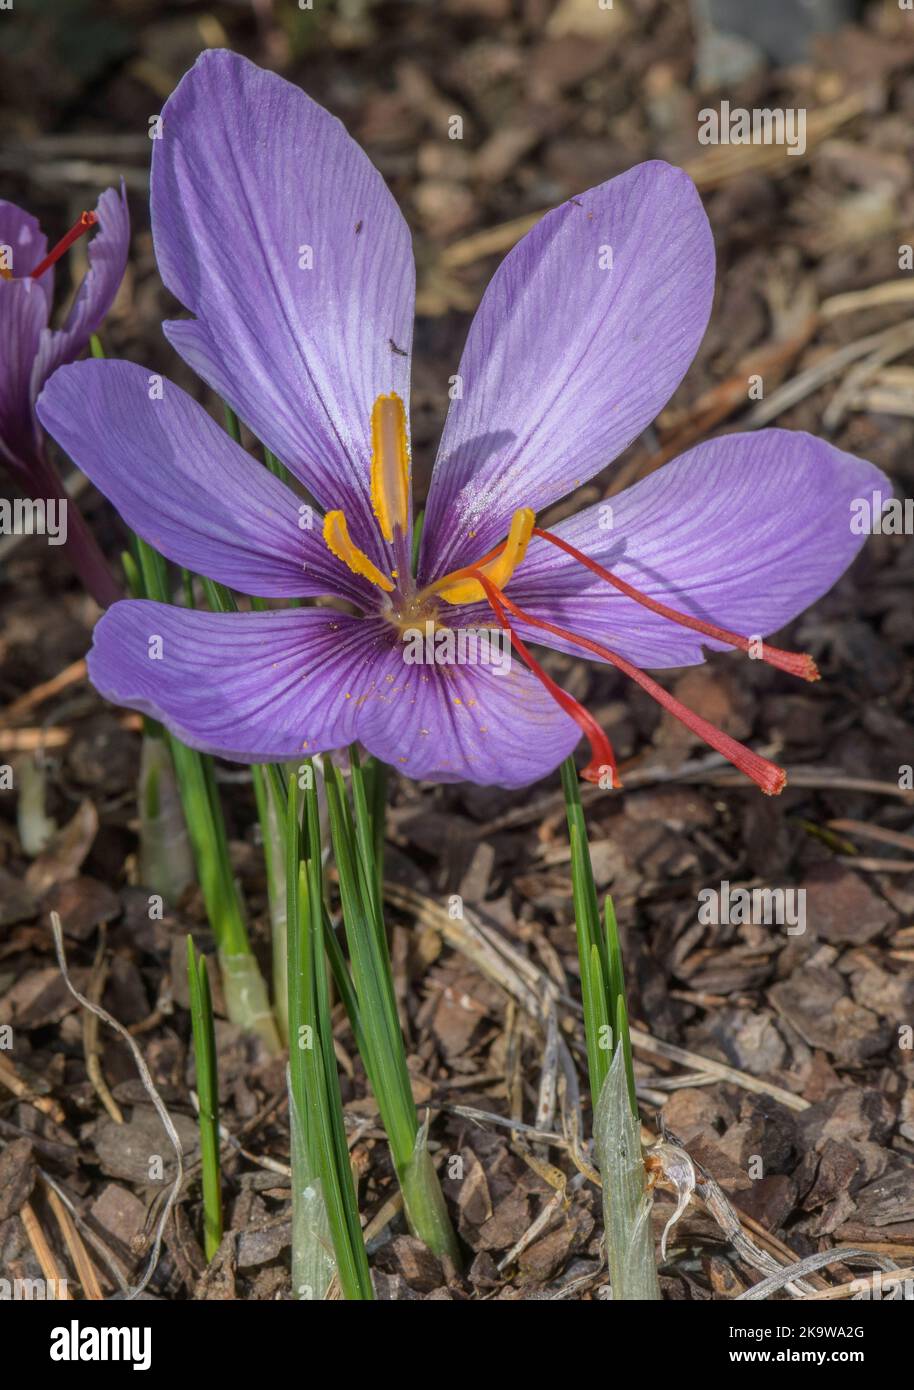 Saffron, Crocus sativus, in flower in autumn, with very long styles. Stock Photo